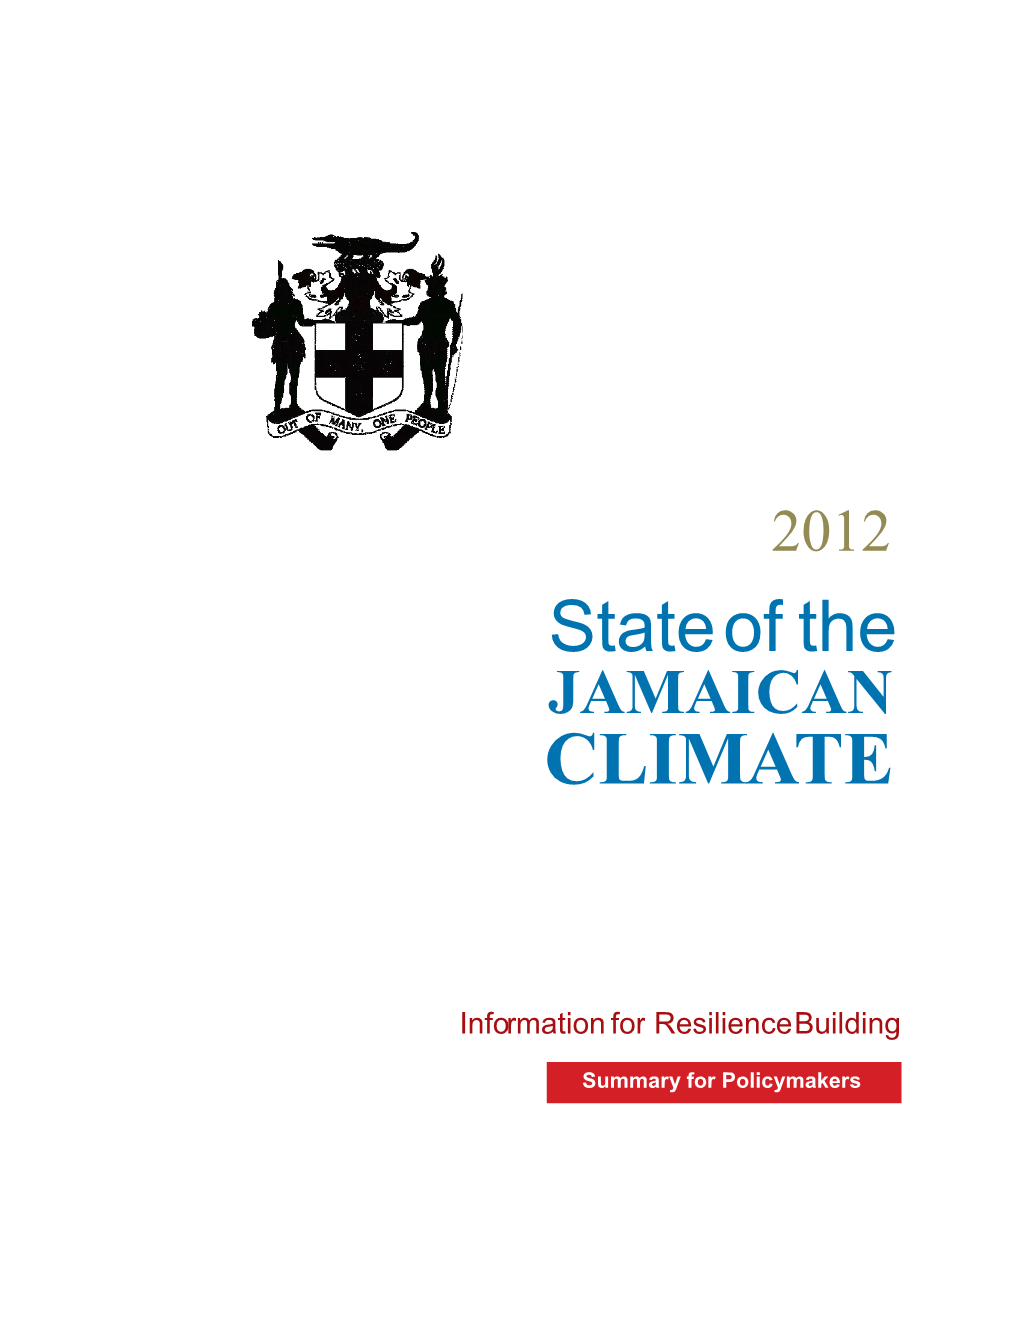 State of the Jamaican Climate 2012: Information for Resilience Building (Summary for Policymakers)